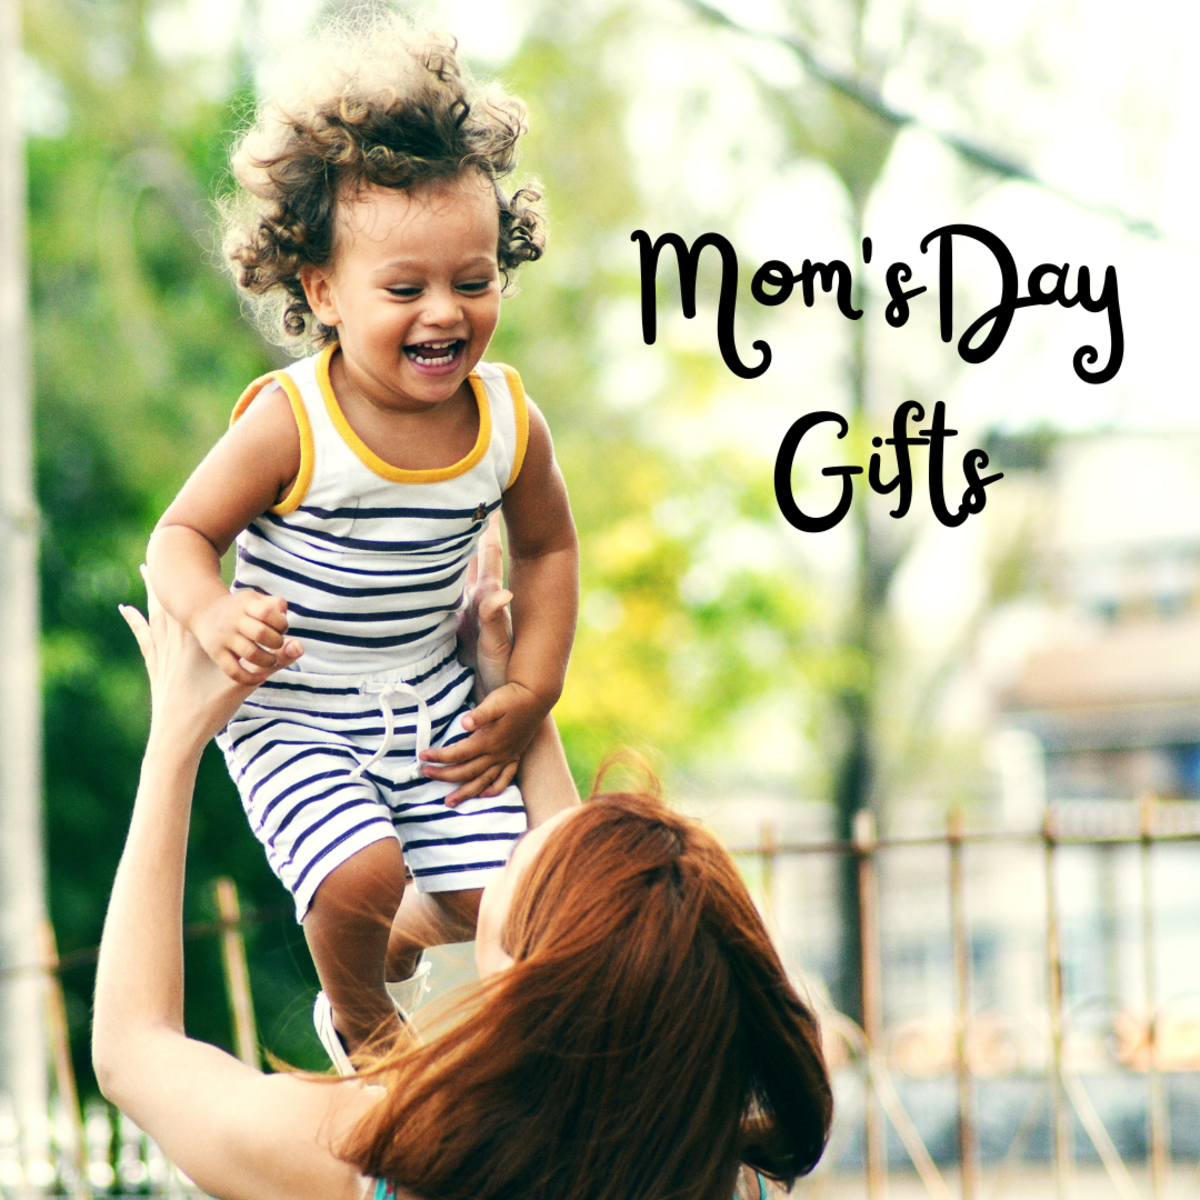 11 Mother’s Day Gifts That Won’t Disappoint